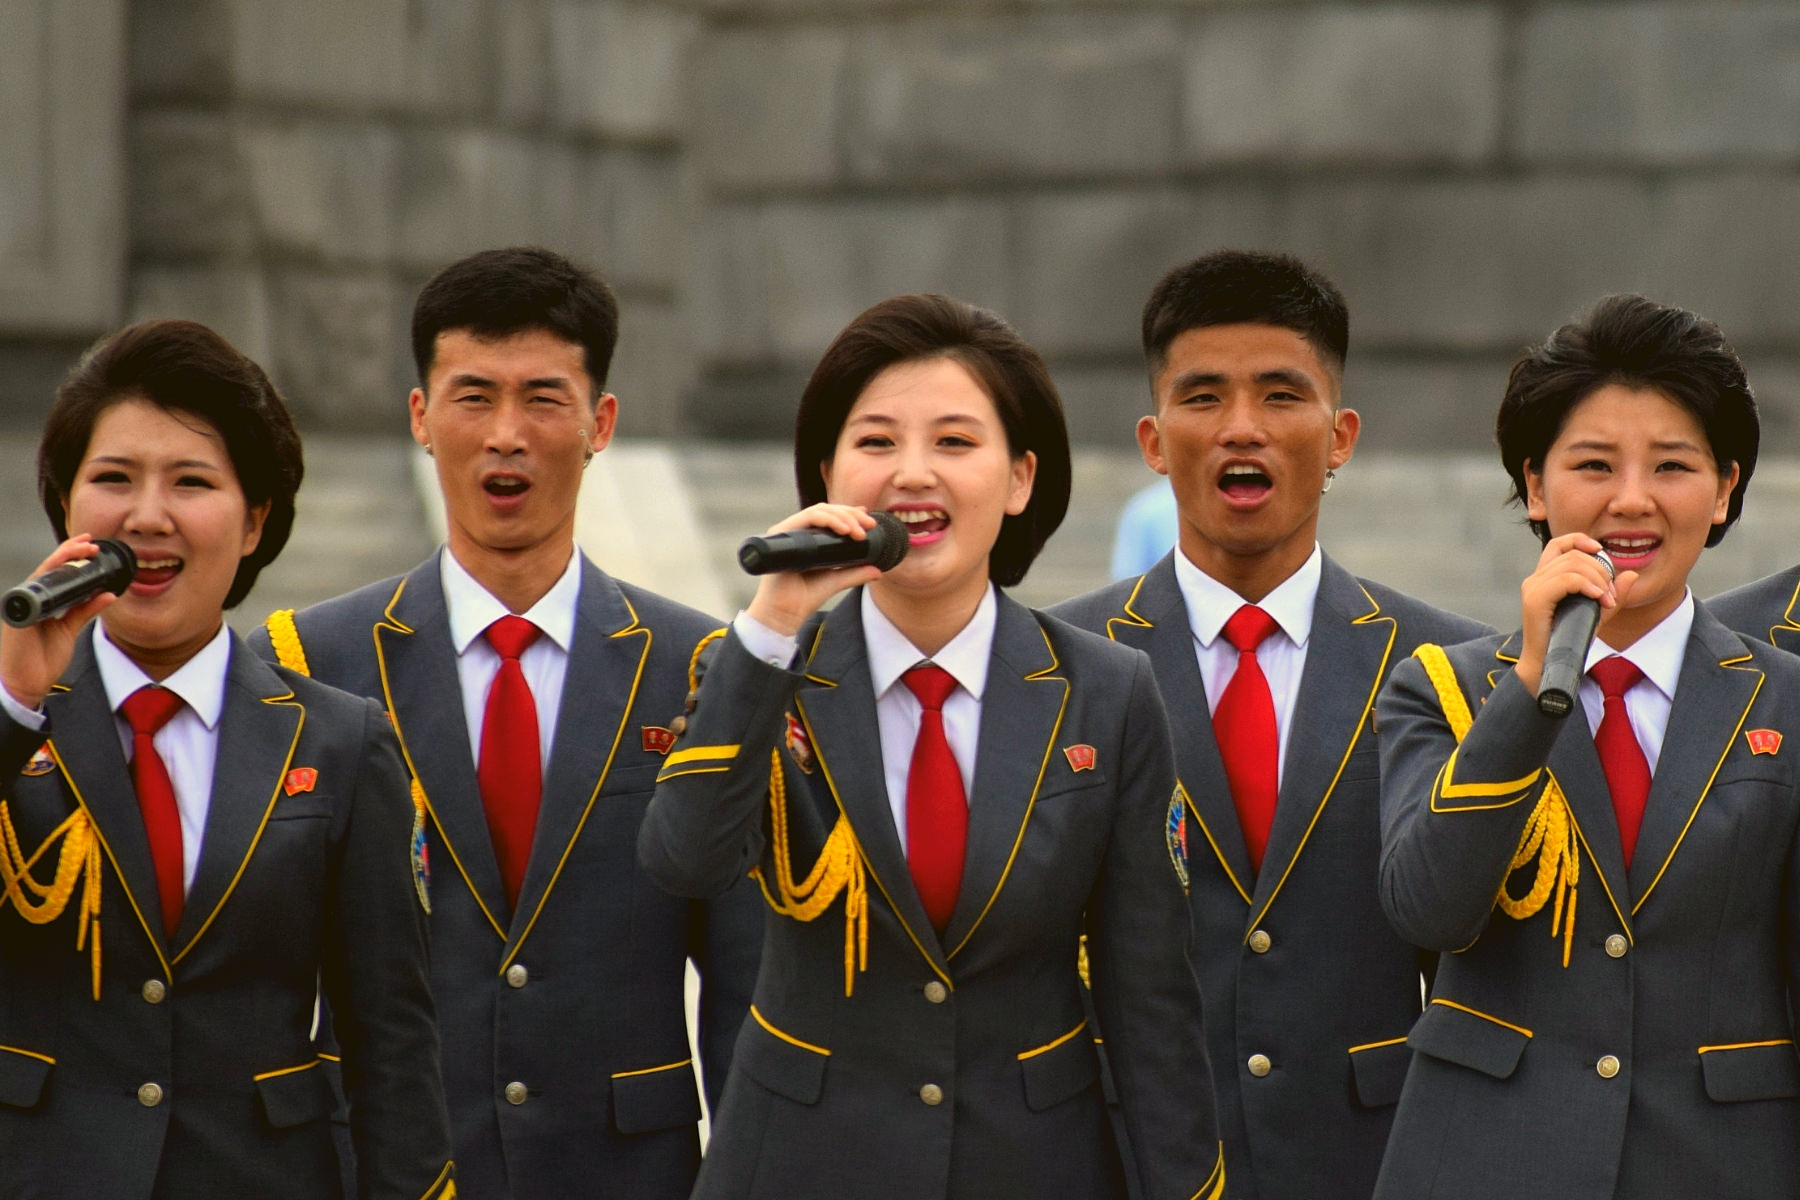 Performance by the Party Monument in Pyongang held by singers in North Korea to celebrate the Liberation of Korea from Japanese colonial rule (15 agosto). Picture taken by KTG. Join us to explore North Korea (DPRK)